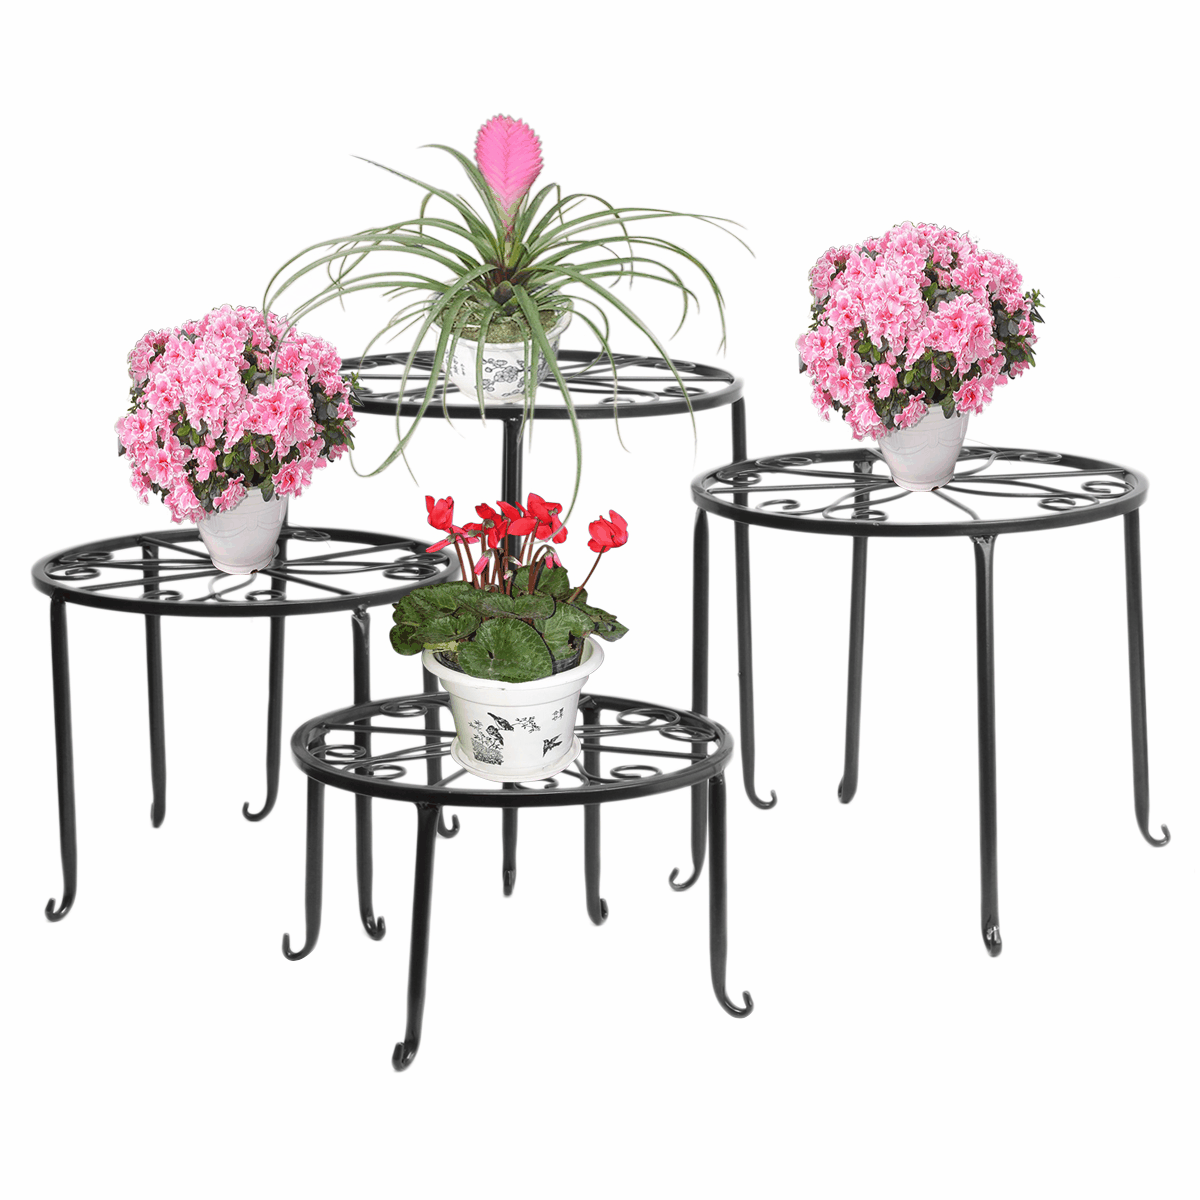 wangza Potted Plant Stand on Wheels Metal Flower Pot Rack Indoor Outdoor Heavy Duty Iron Potted Plant Stand Round Dolly Holder on Wheels Planter Trolley Casters